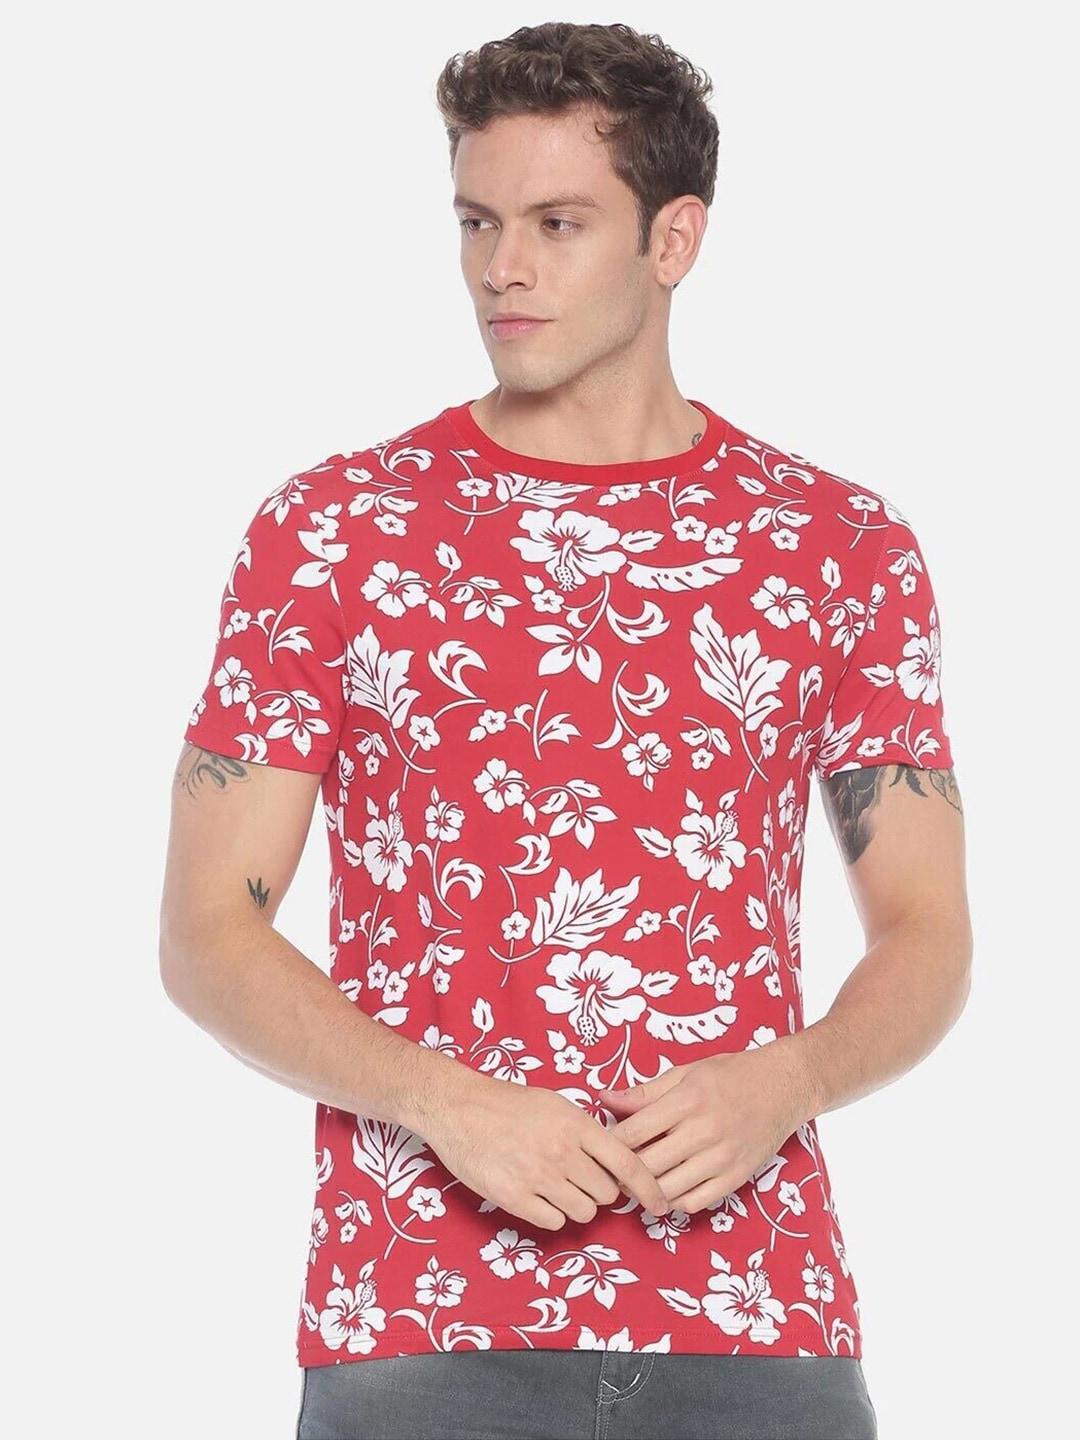 steenbok-men-red-&-white-floral-printed-t-shirt